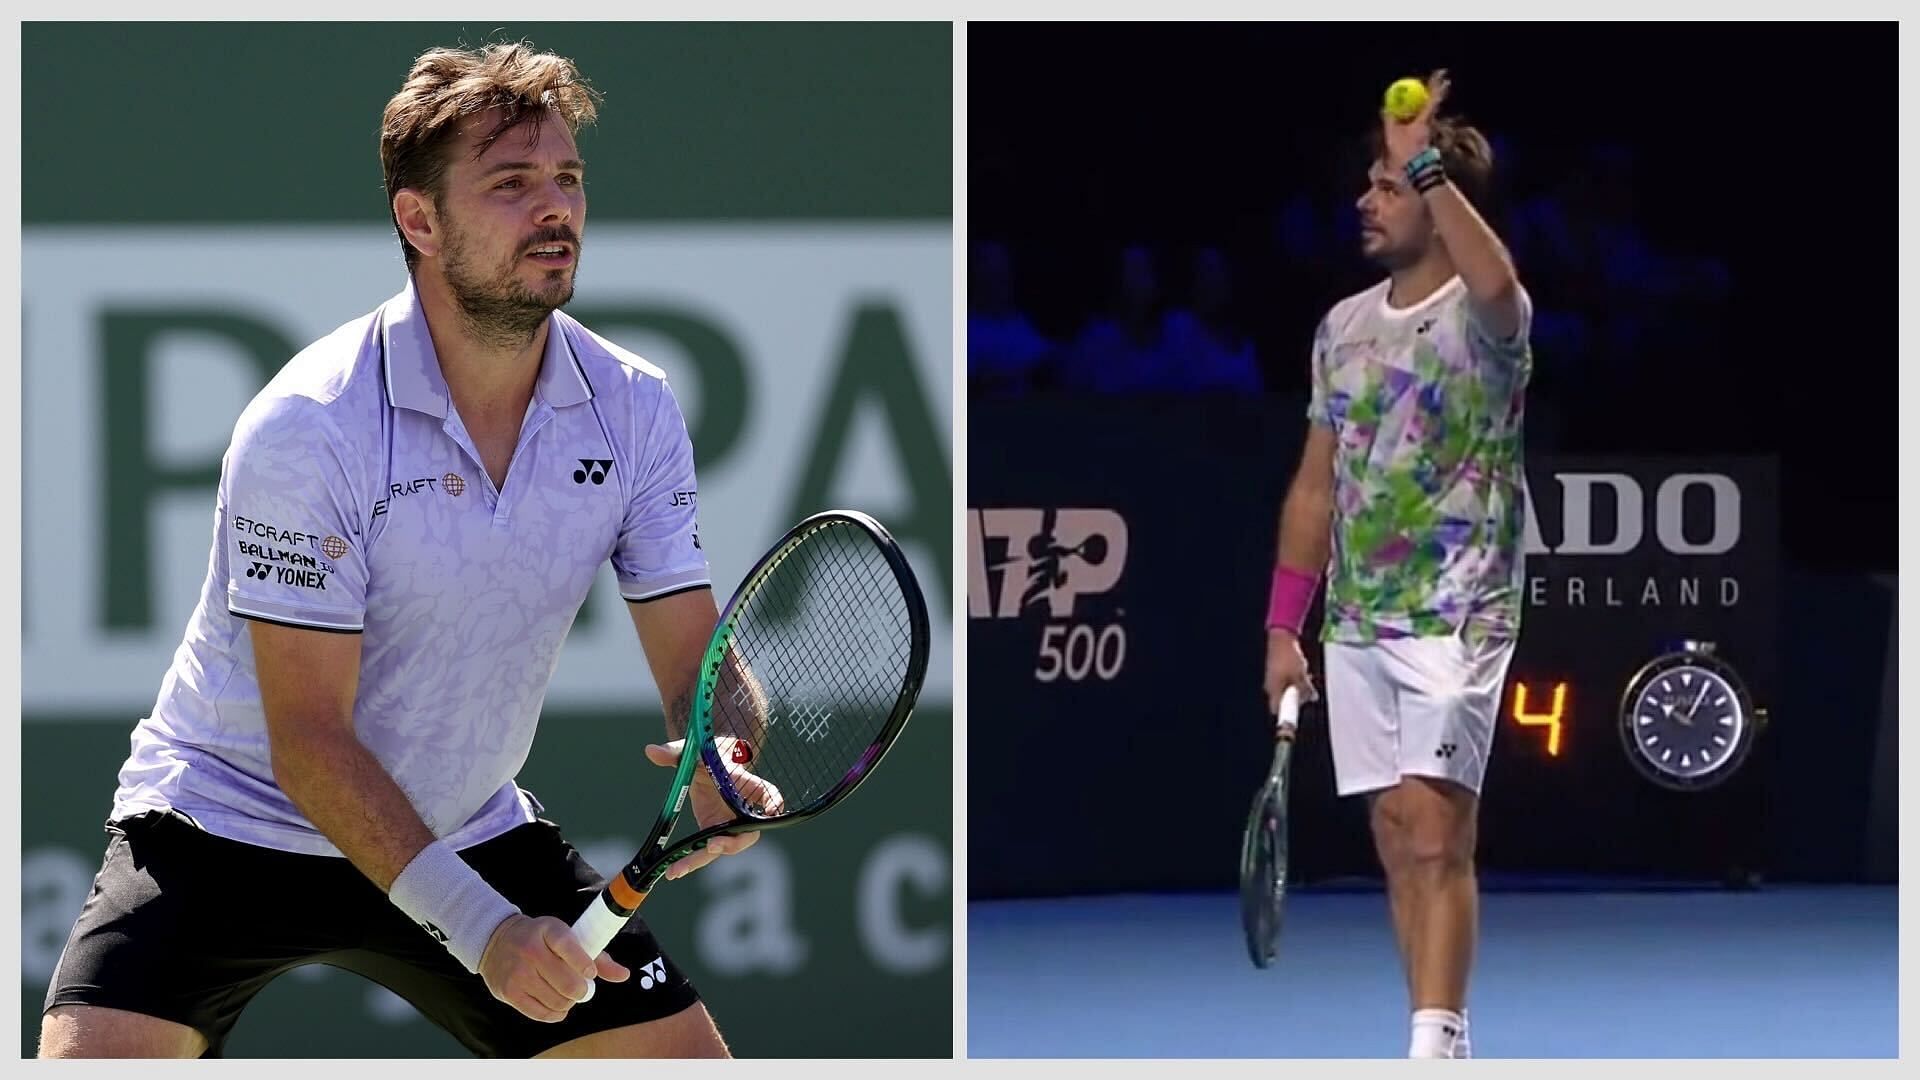 Watch: Stan Wawrinka pauses mid-match, sends his love to young fans by waving at them during Swiss Indoors Basel match